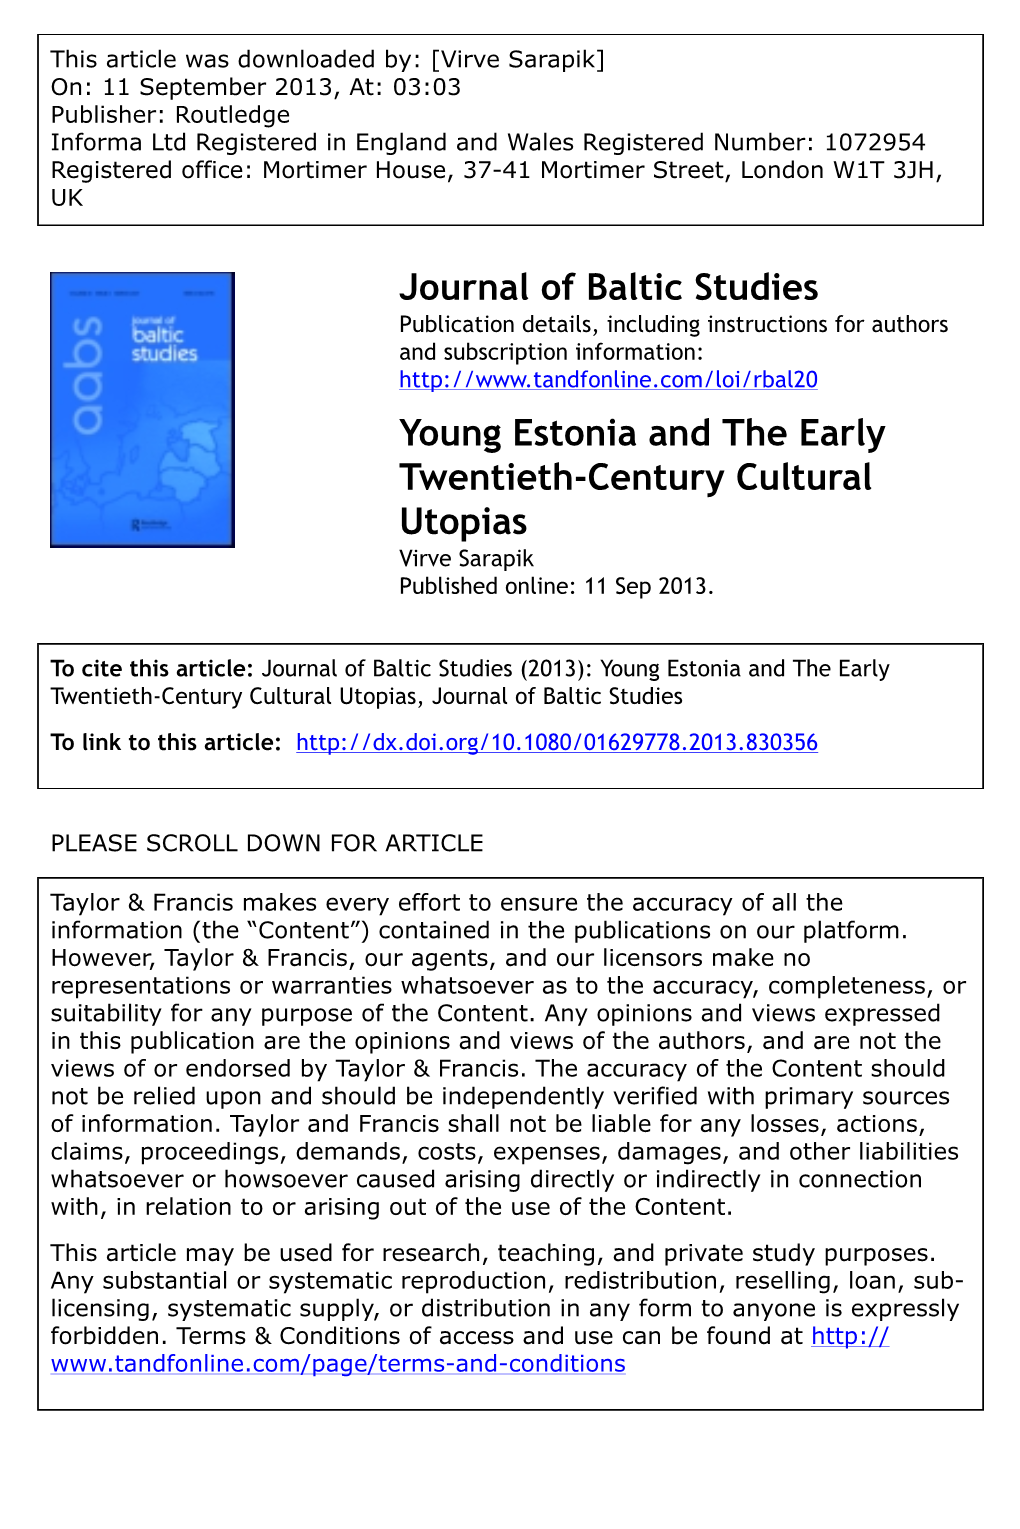 Journal of Baltic Studies Young Estonia and the Early Twentieth